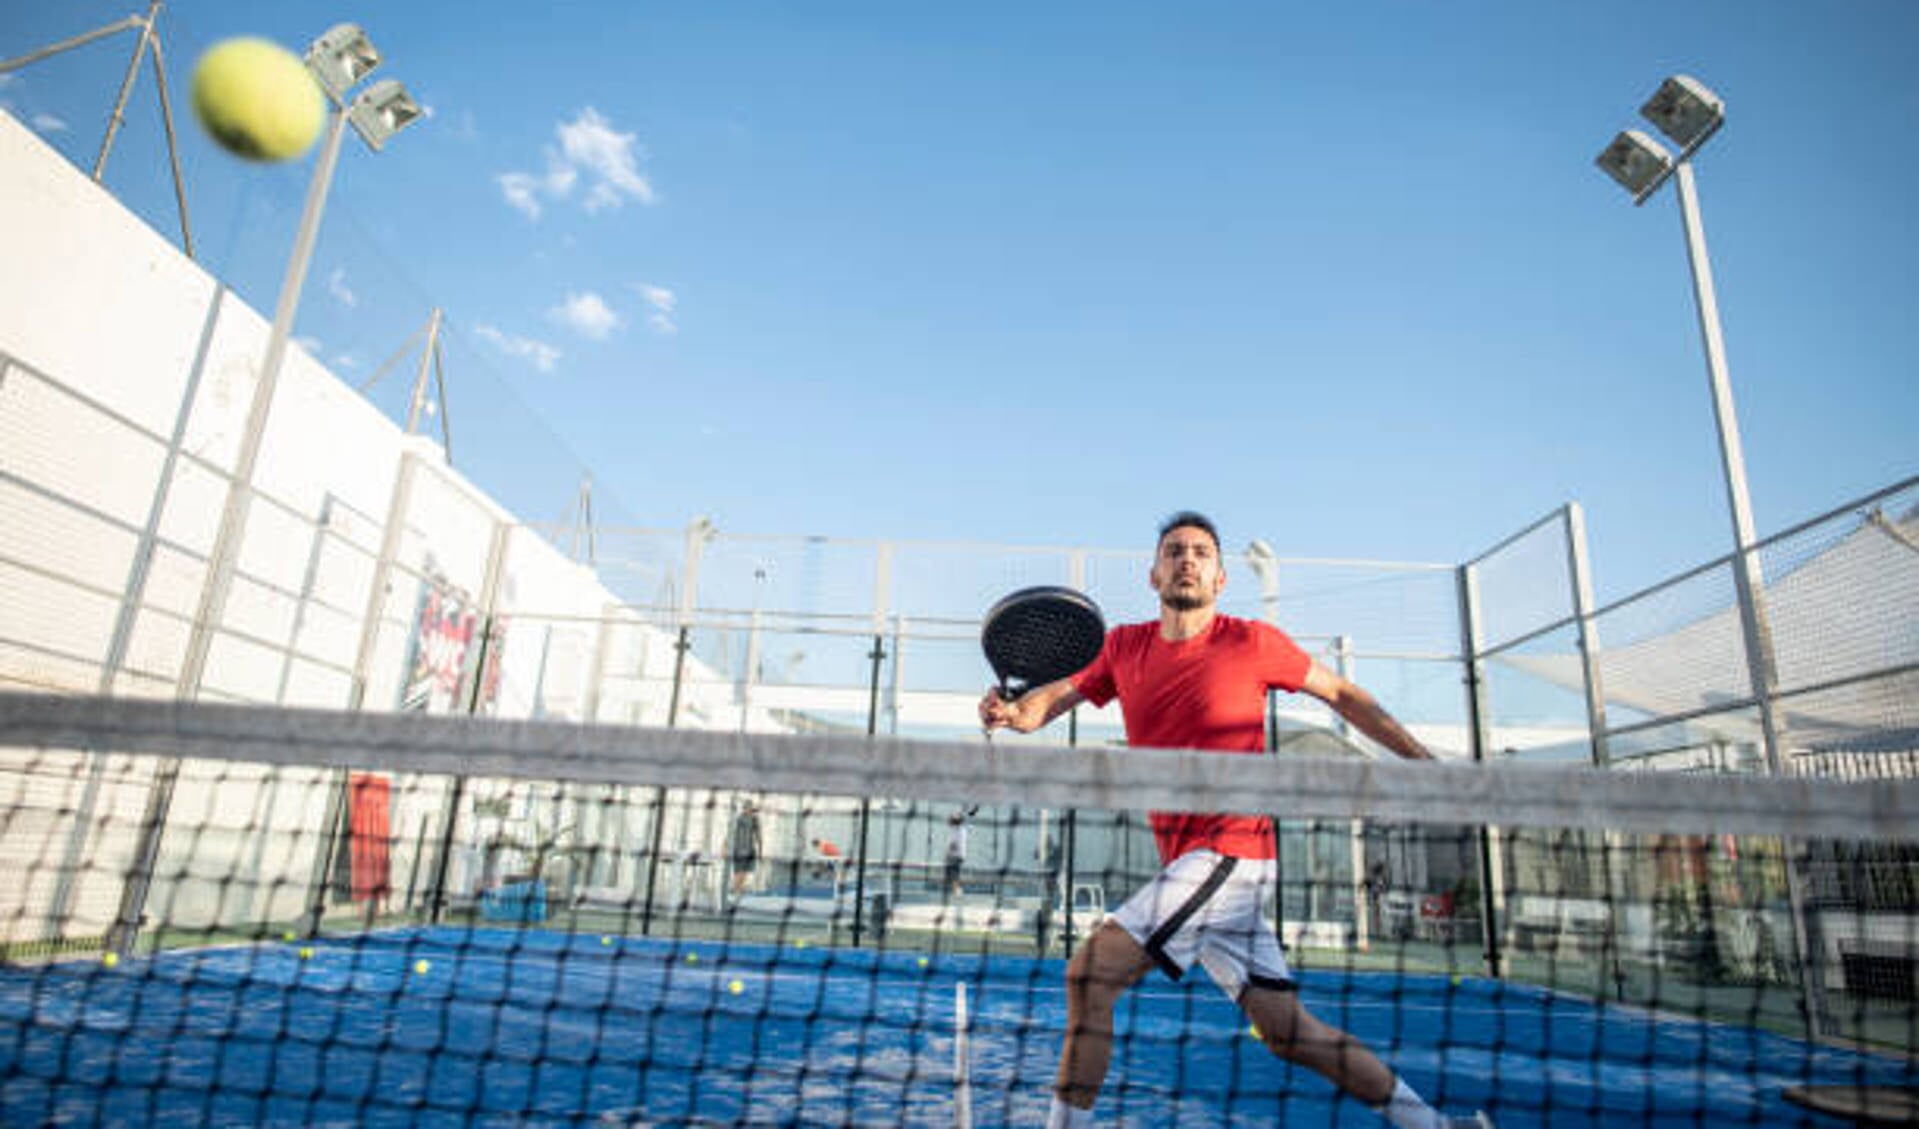 Man playing paddle tennis in court